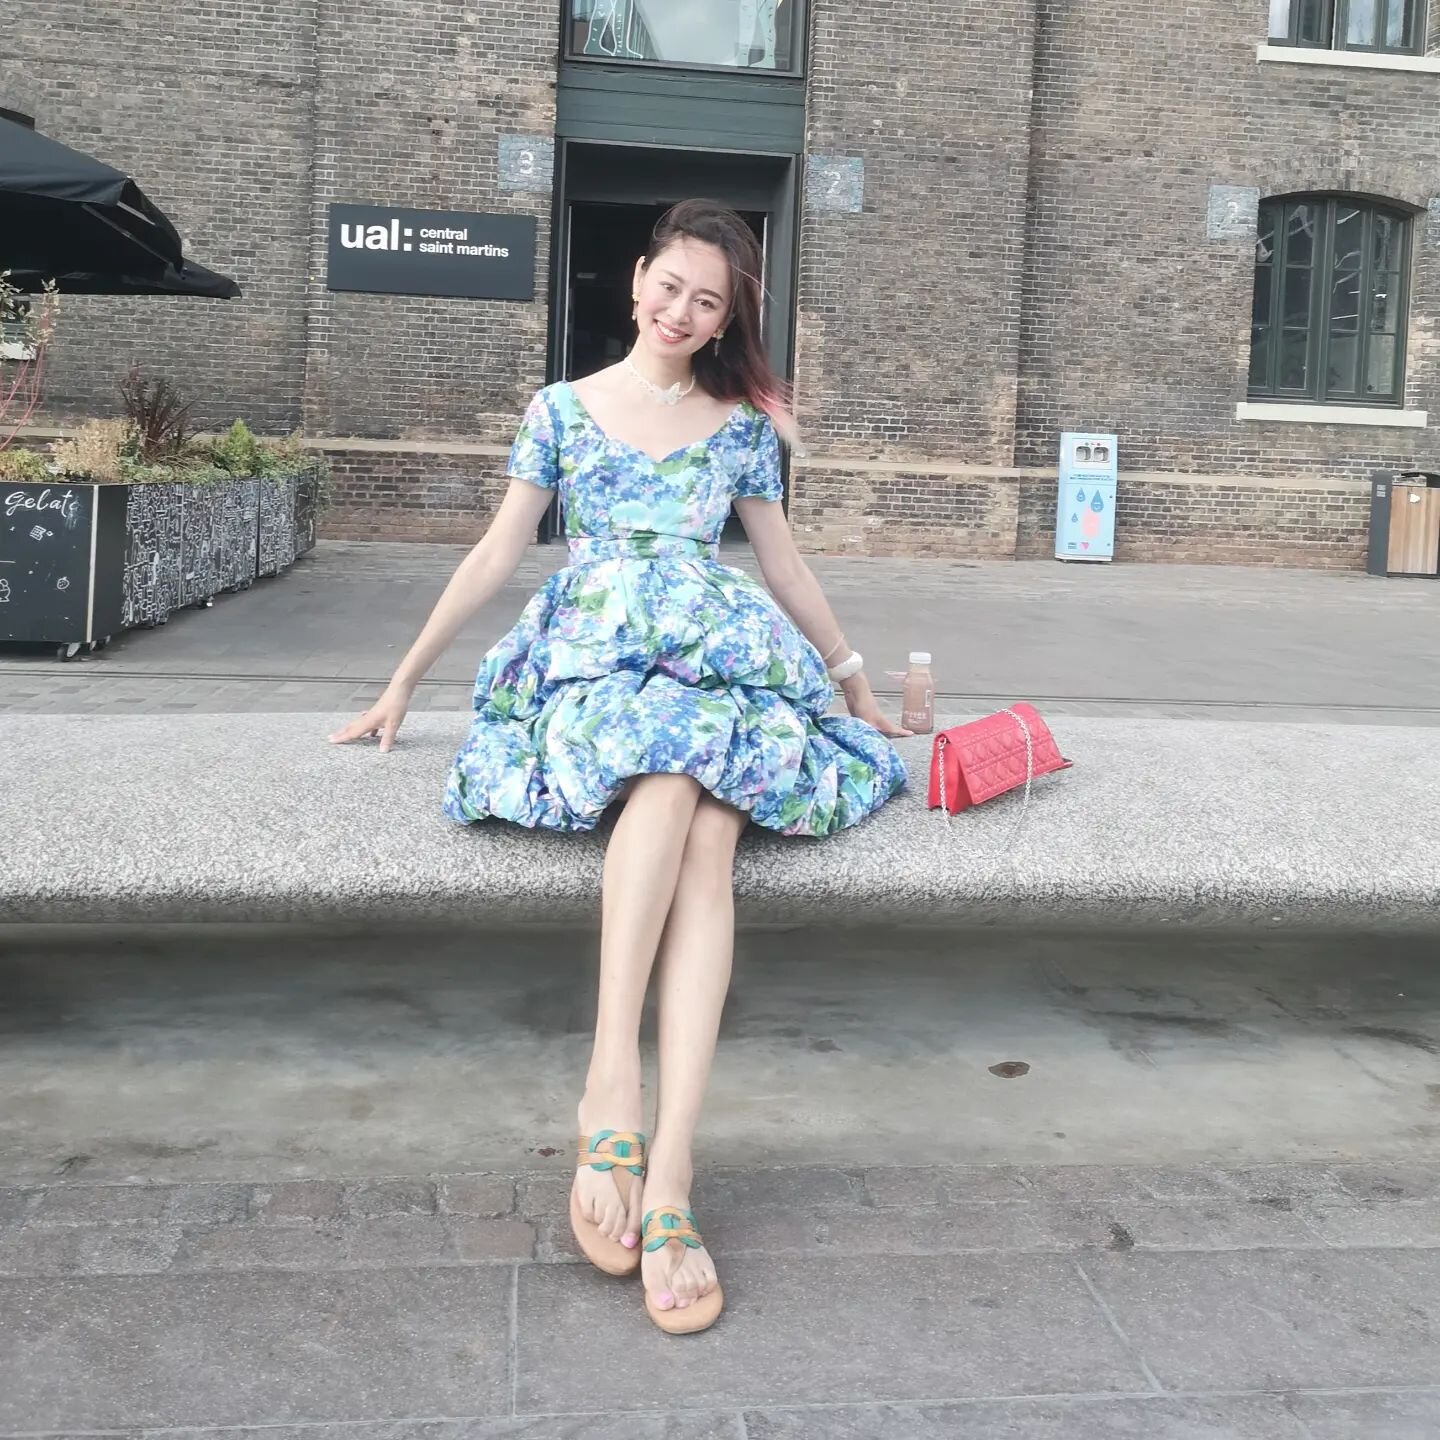 Central st-martins in Kings Cross is an always best place to take pictures!